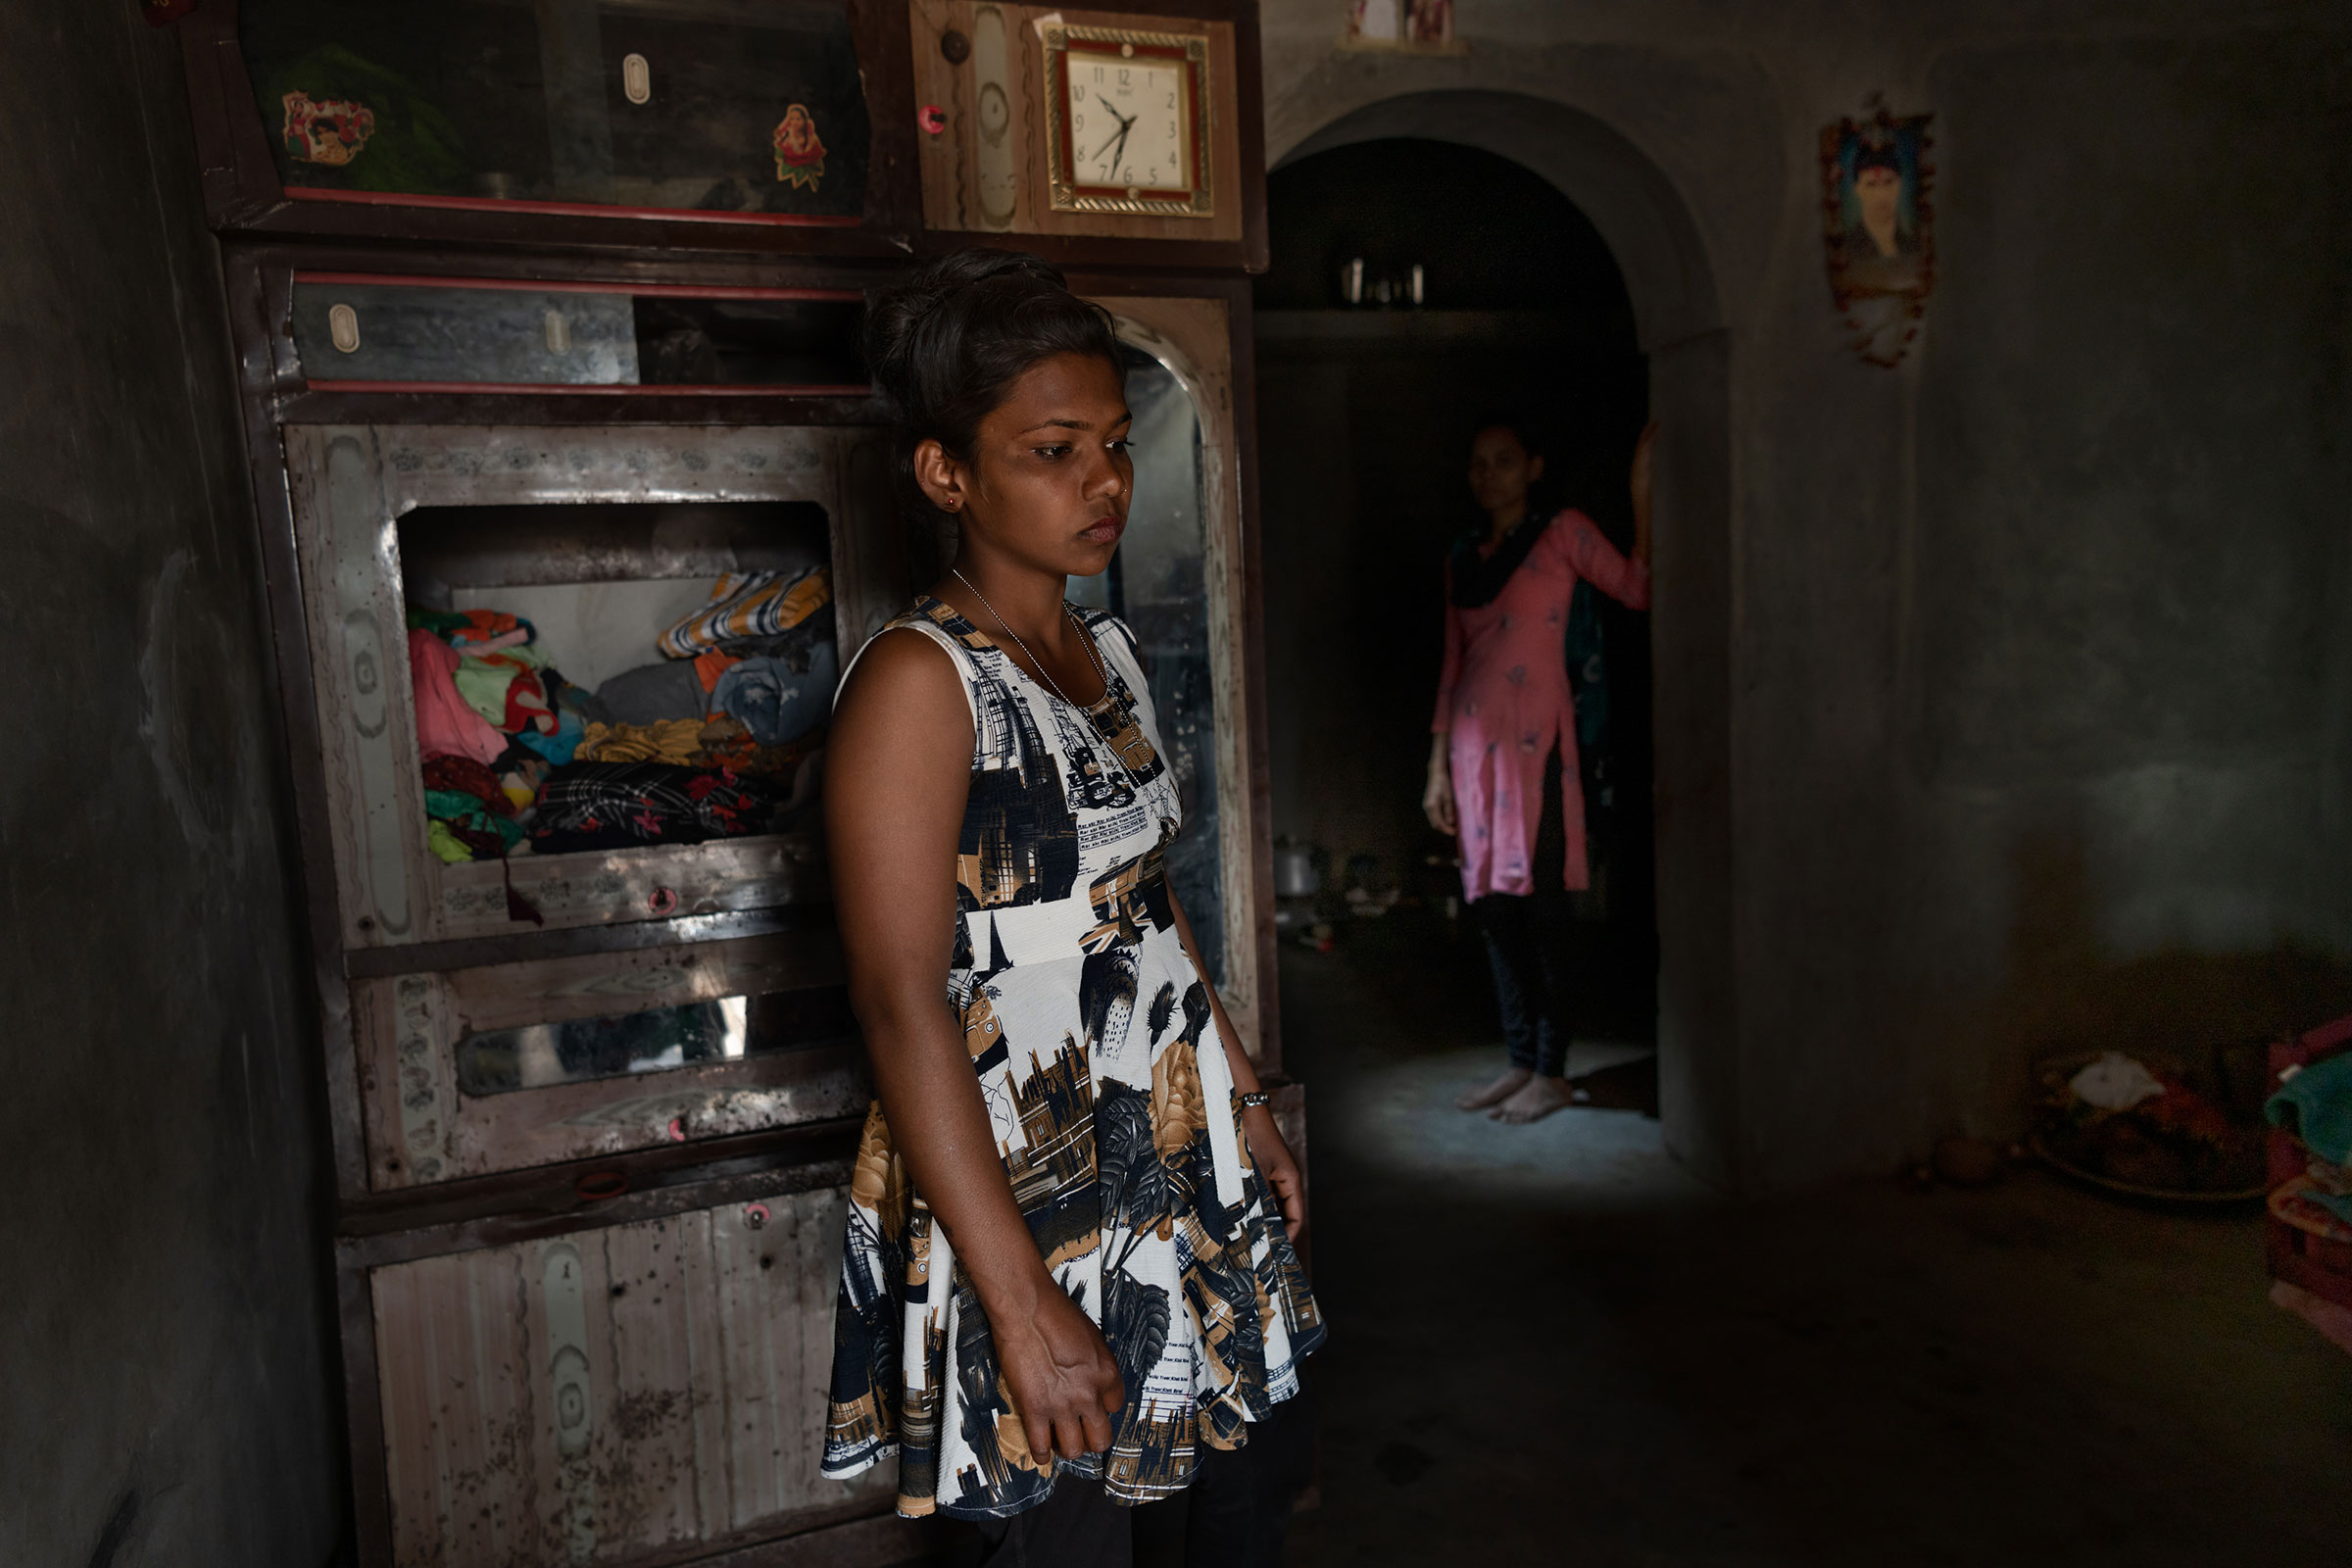 Savitri Vasava, 23, lives in Dakor, Gujarat, India, and is the mother of a 3-year-old. In February, she said she planned to become a surrogate after seeing her sister-in-law build a house from the money she made from surrogacy. (Smita Sharma for TIME)